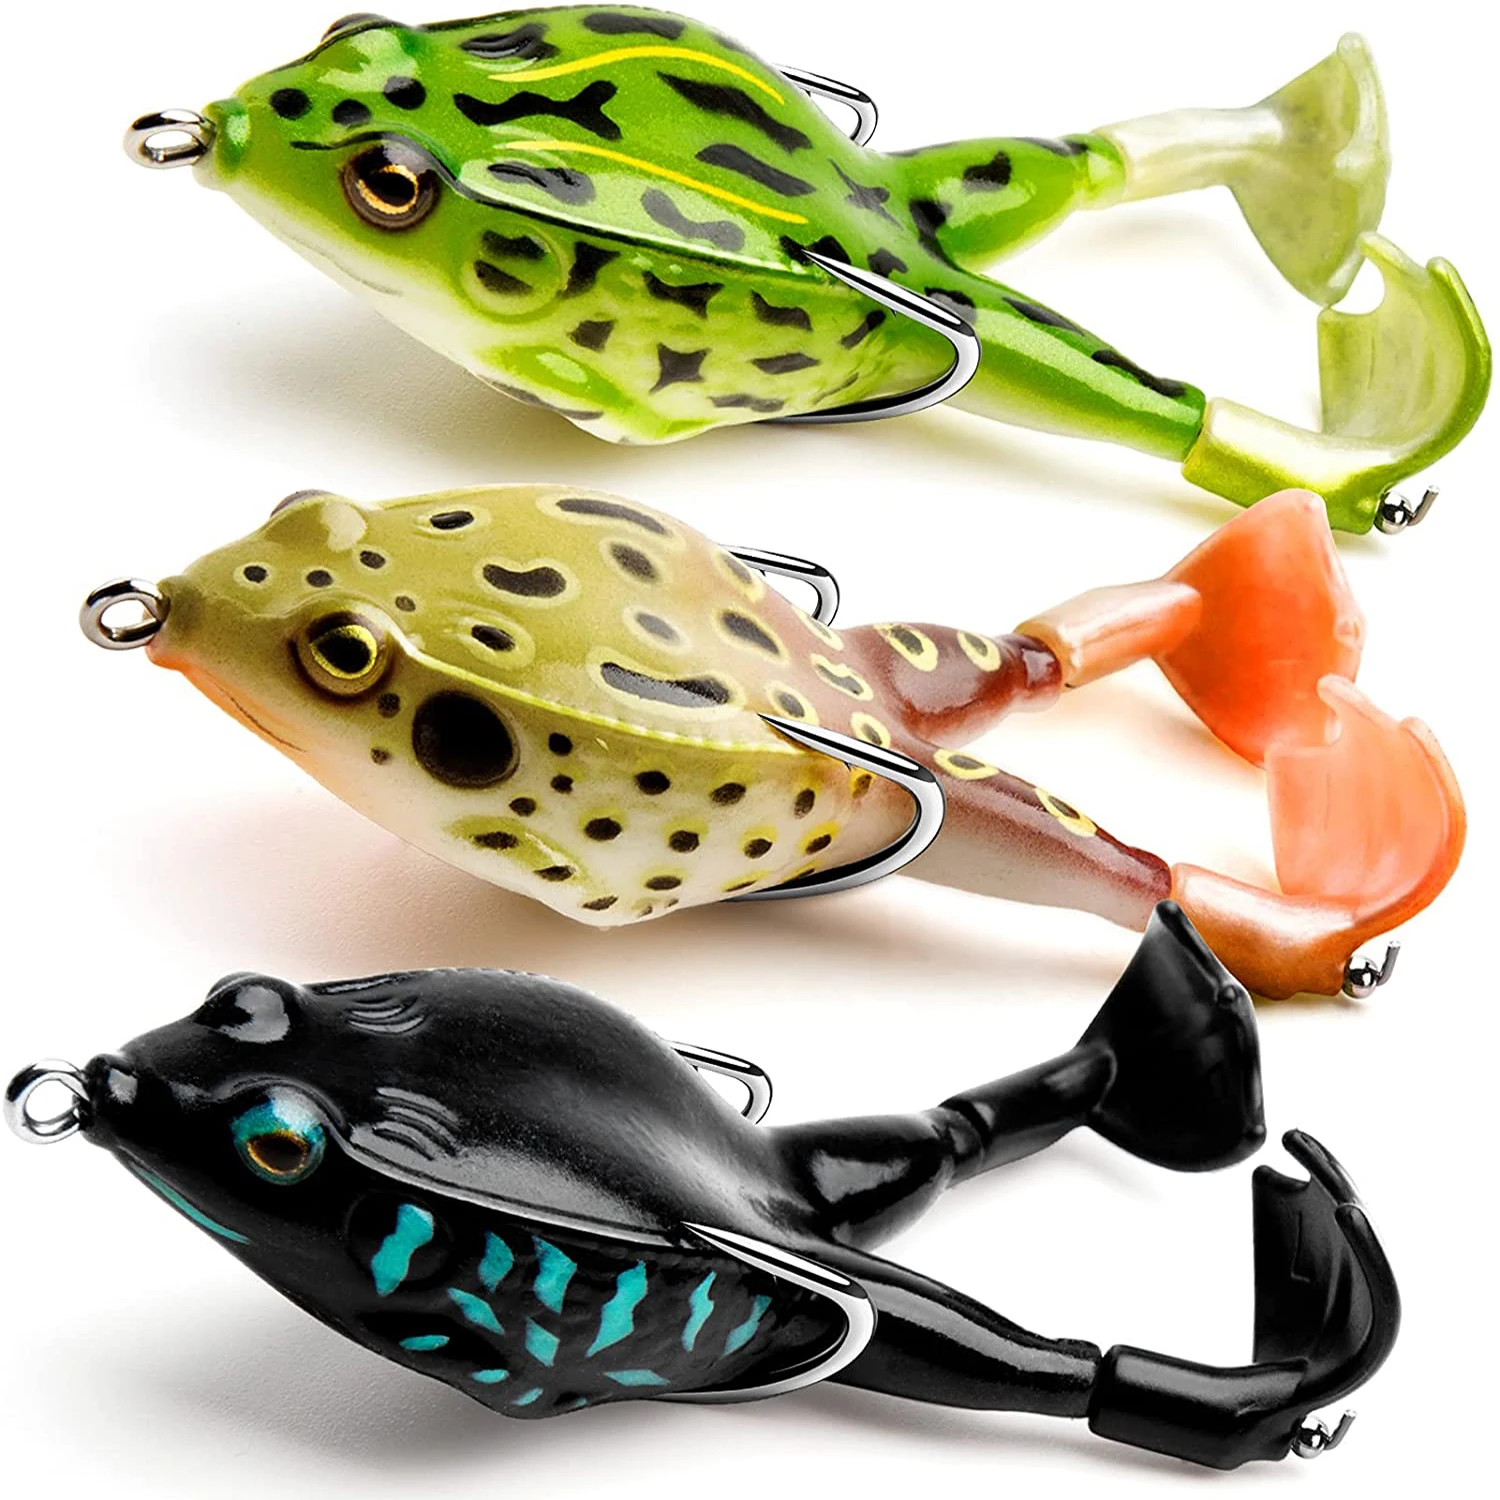 

3Pcs Topwater Frog Lure Fishing Lures Kit Realistic Prop Frog Swimbait Artificial Bait with Double Propeller for Bass Trout